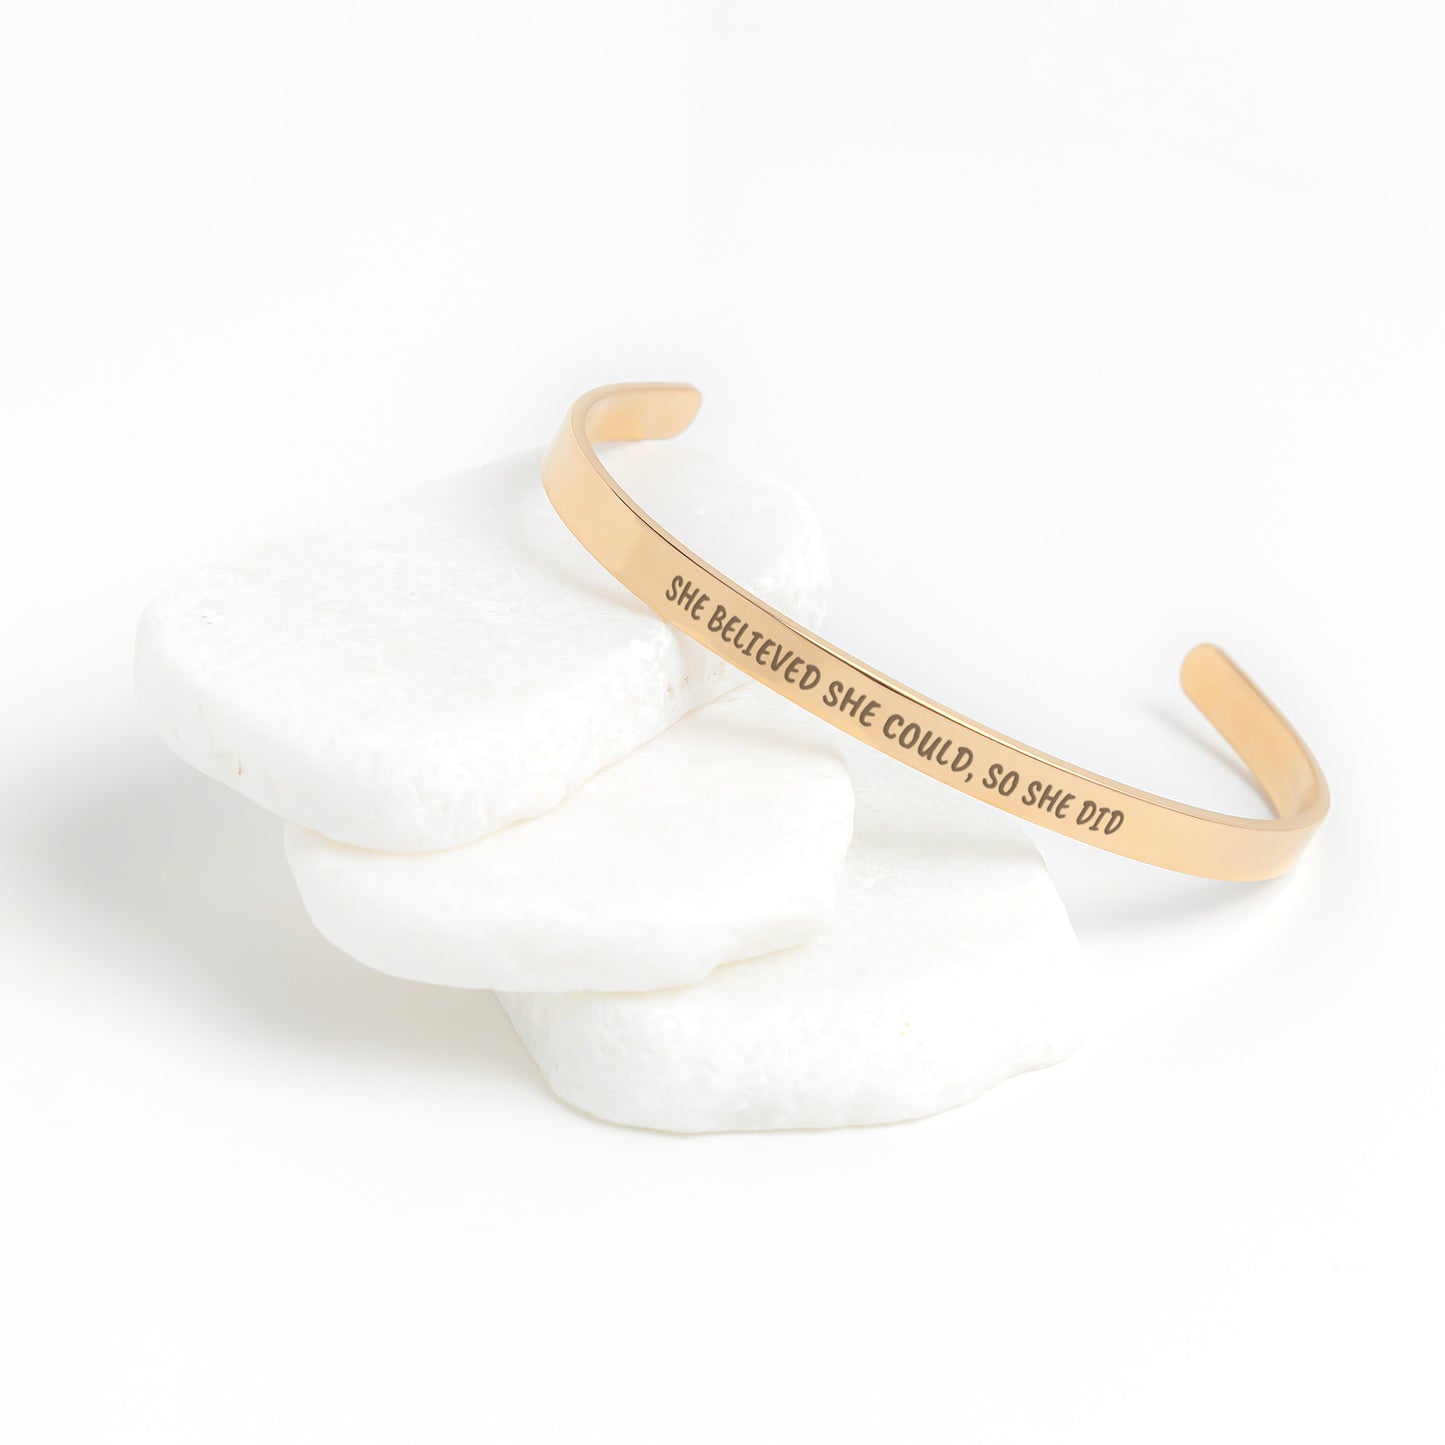 She Believed She Could, So She Did Cuff Bracelet